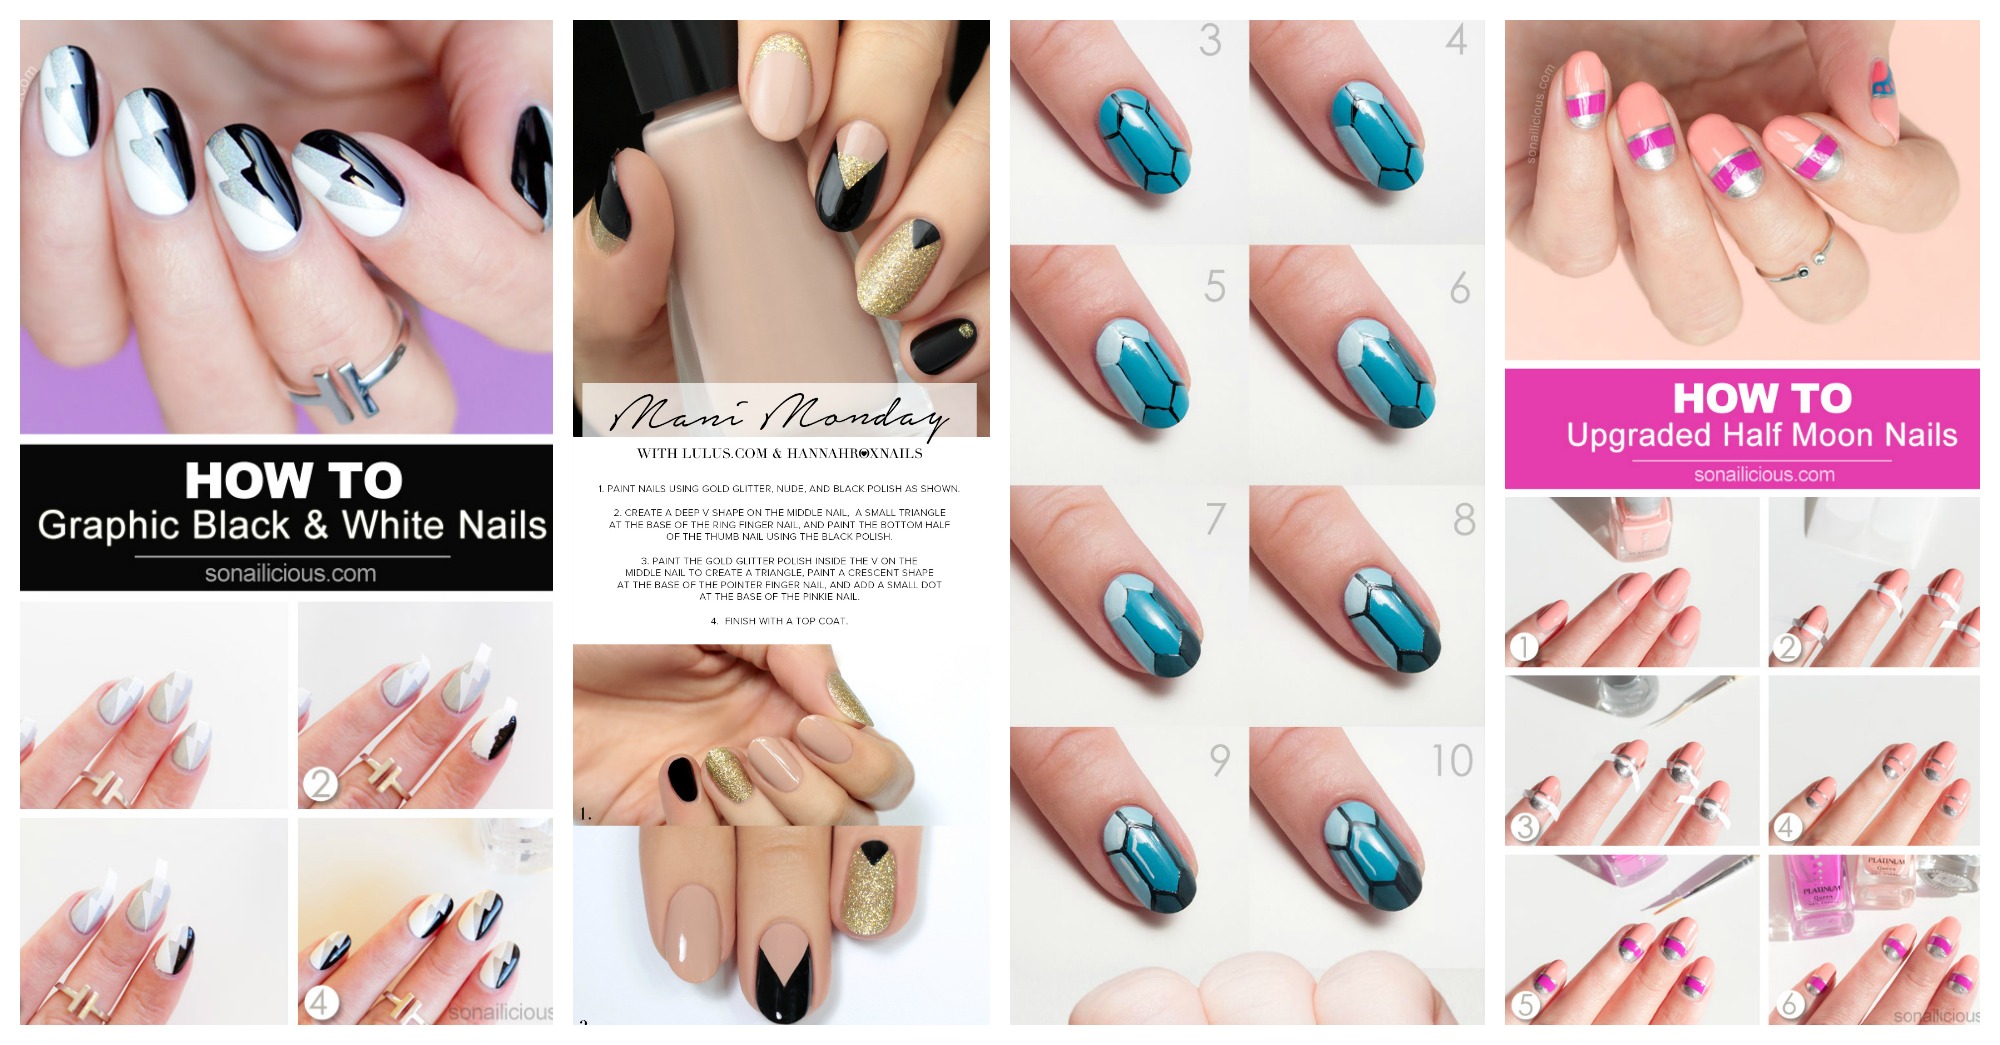 6. Step-by-Step Nail Art Tutorials for Beginners - wide 5